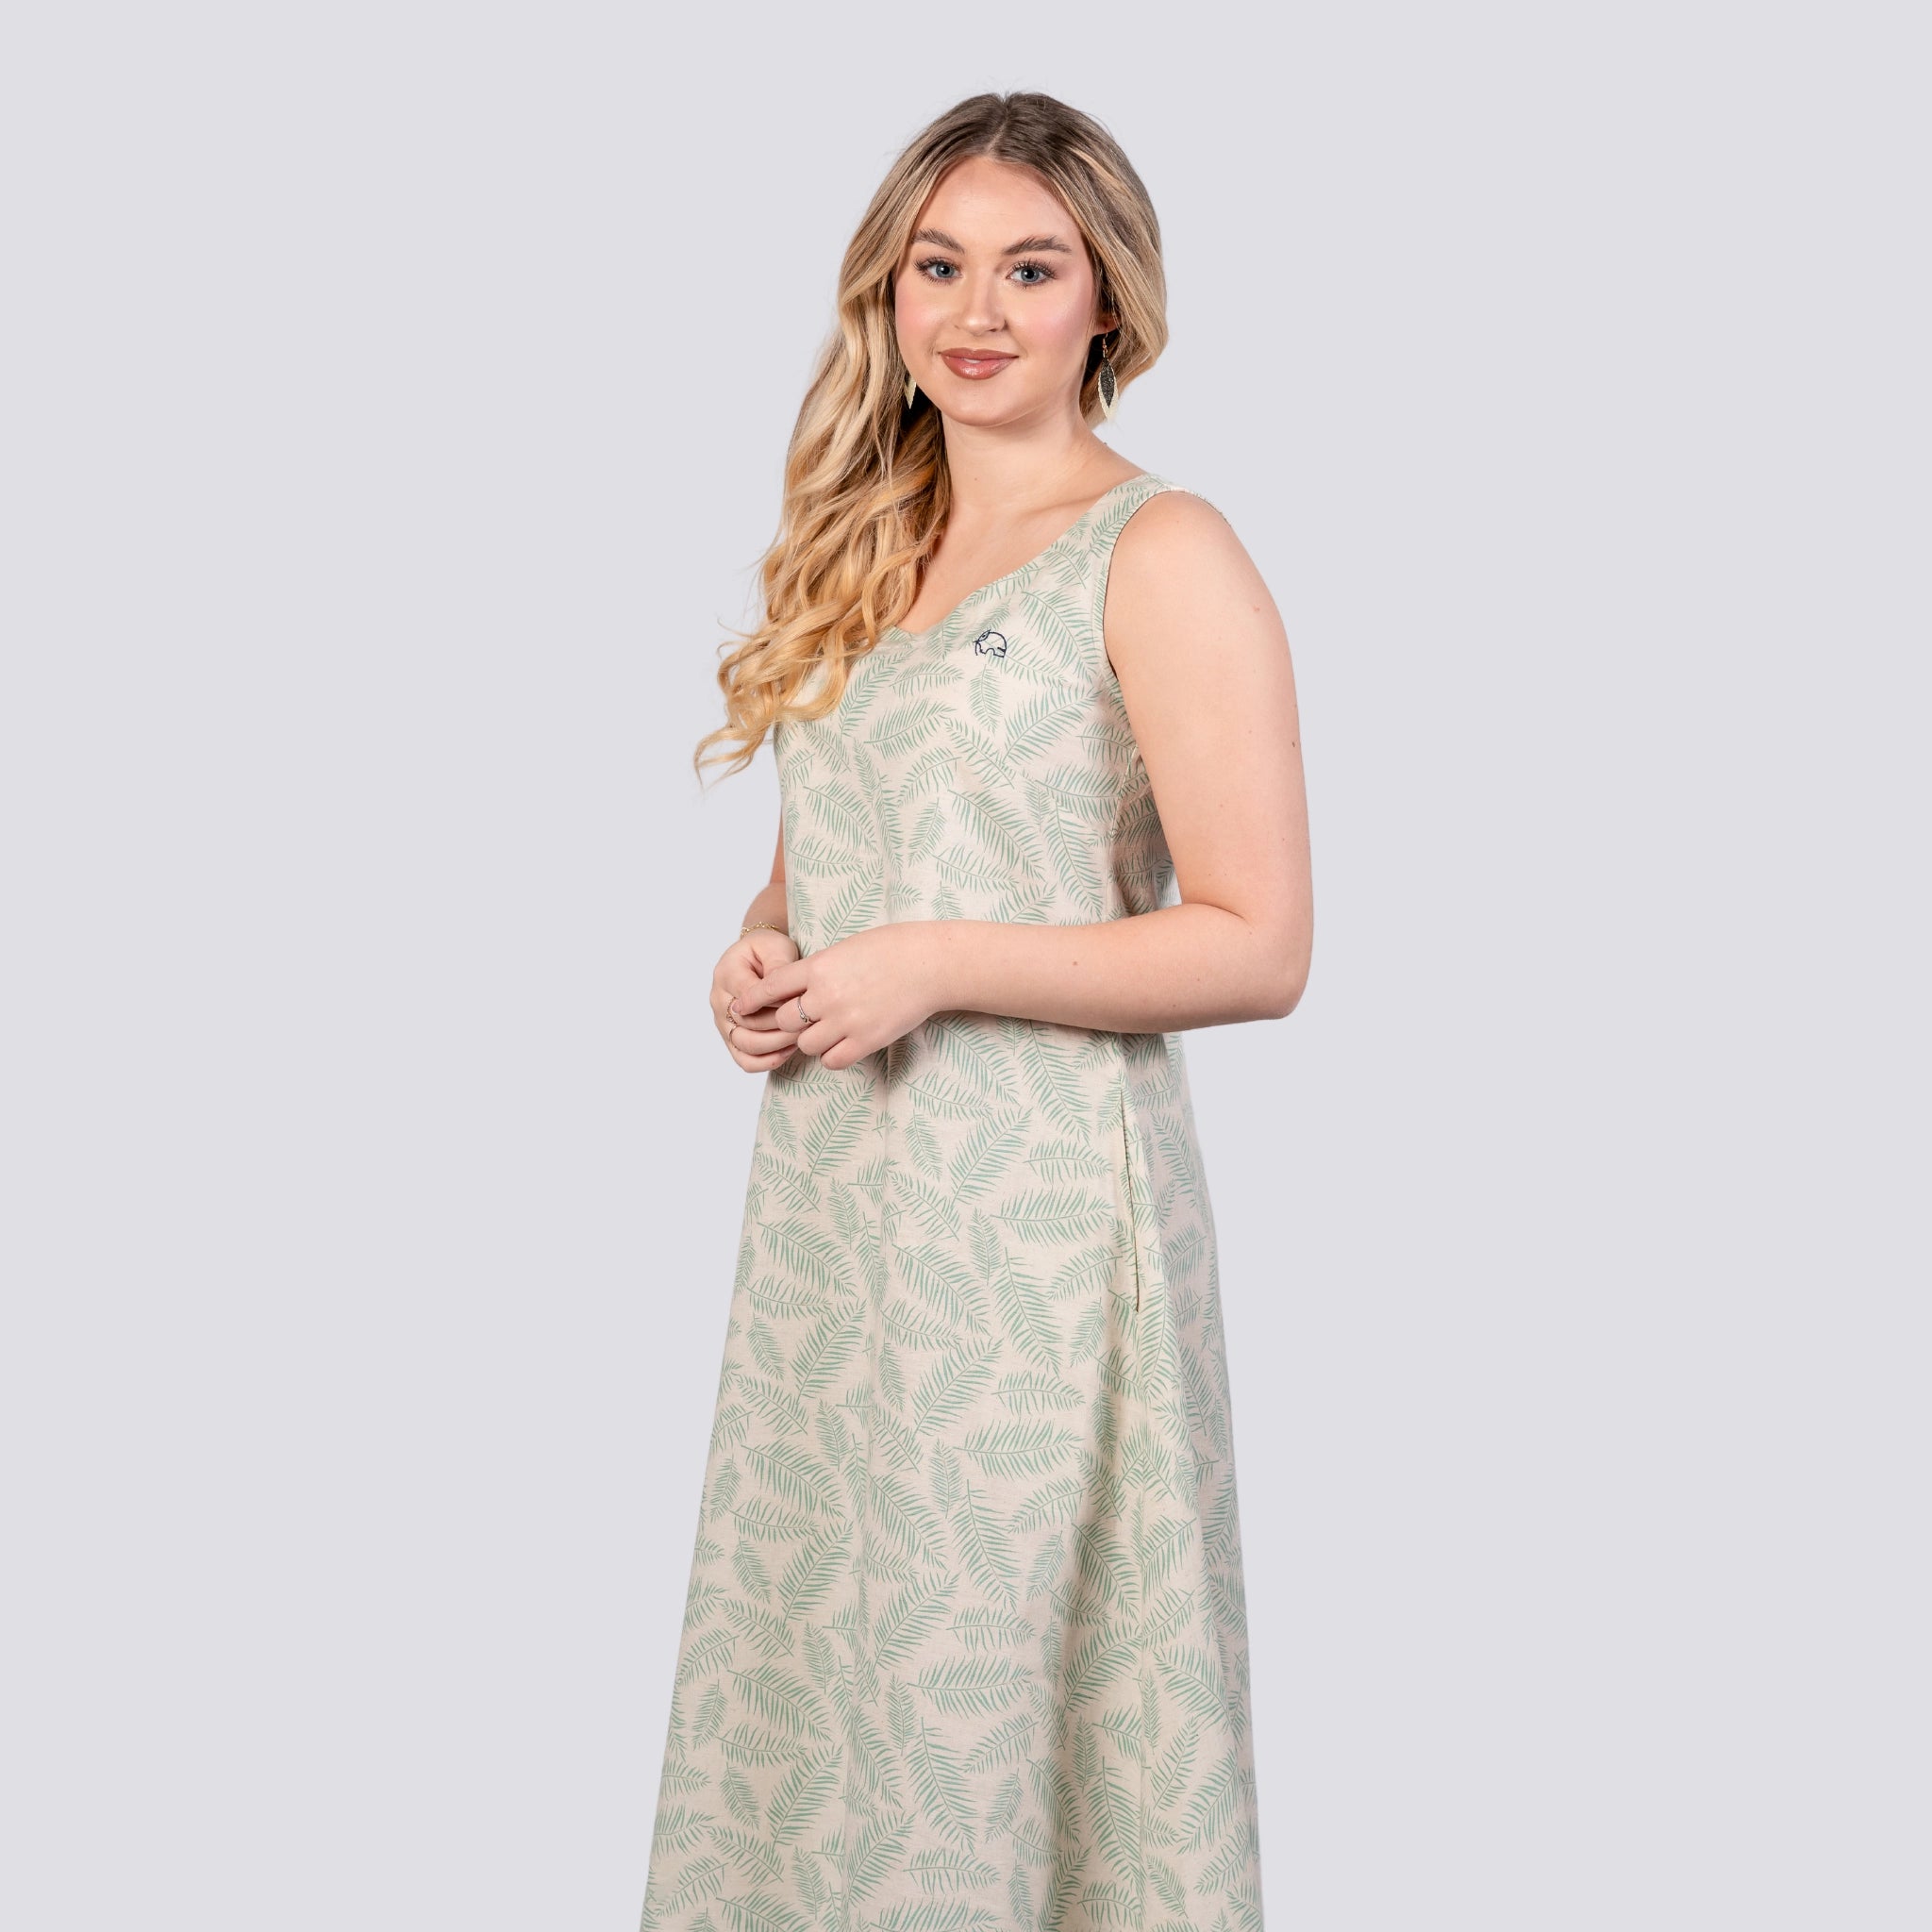 A woman with long blonde hair wearing a light green patterned Eco-Luxe Look: Sustainable Mystic Breeze Linen Hi-Lo Midi Dress for Women by Karee stands against a plain background. The dress, made of a linen cotton blend, features a high low hemline. She faces the camera with her hands clasped in front of her.